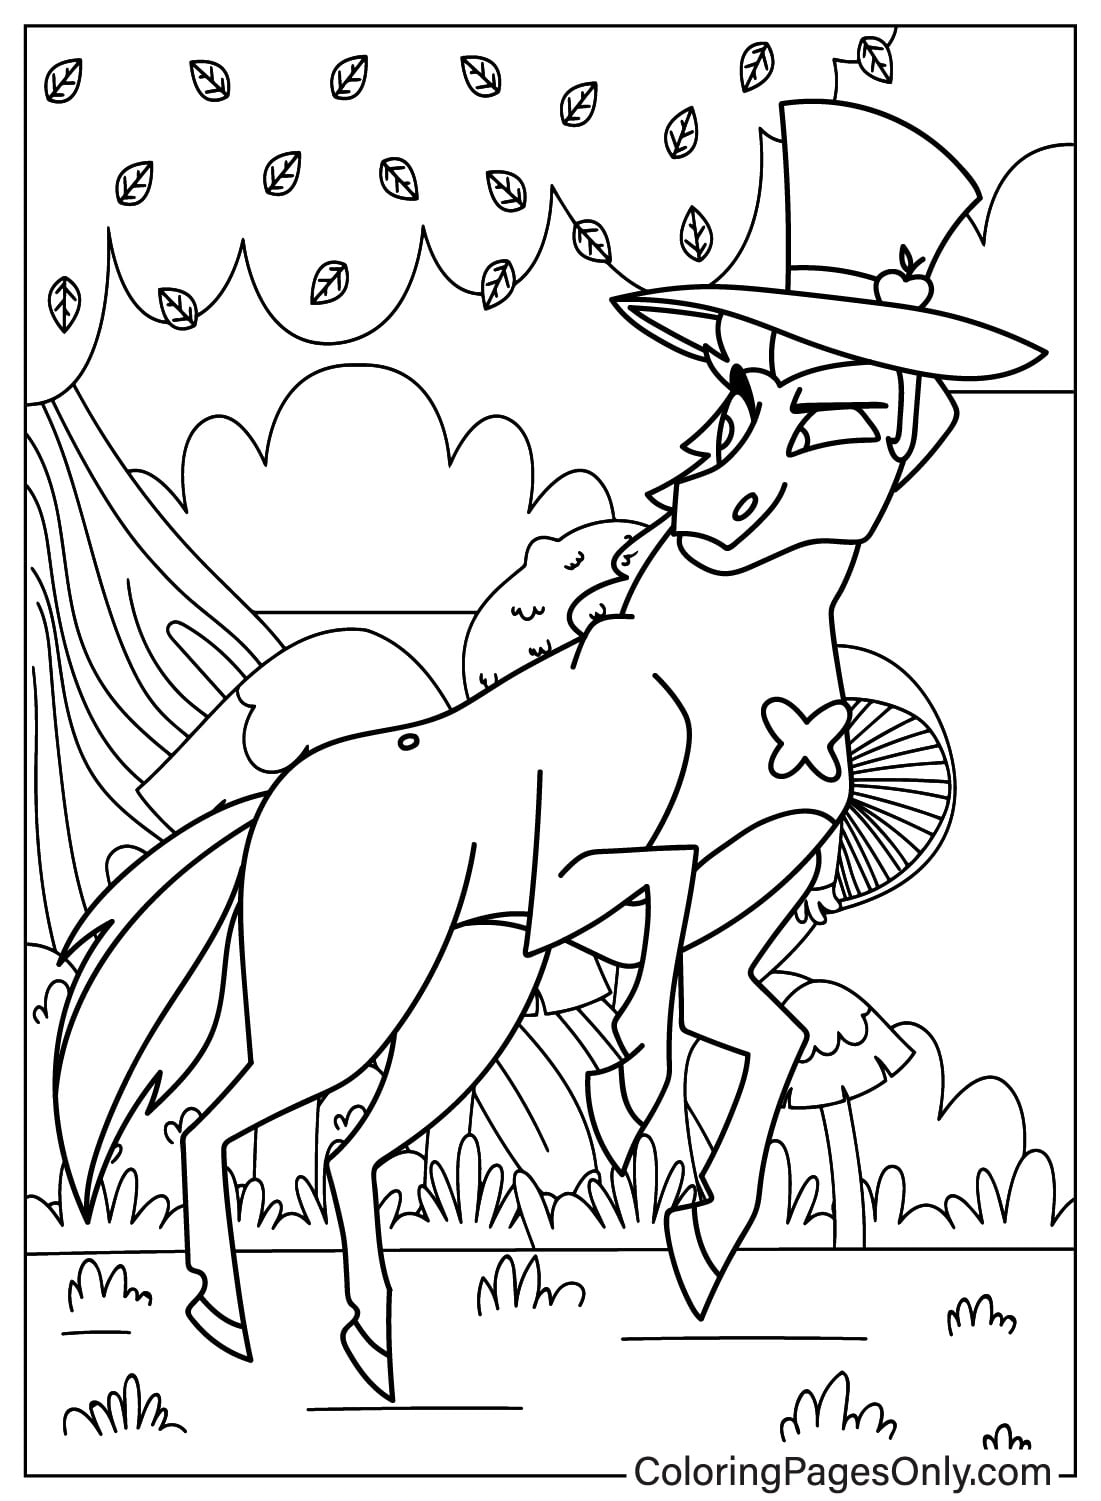 Lucifer Morningstar Transfiguration Coloring Page from Lucifer Morningstar